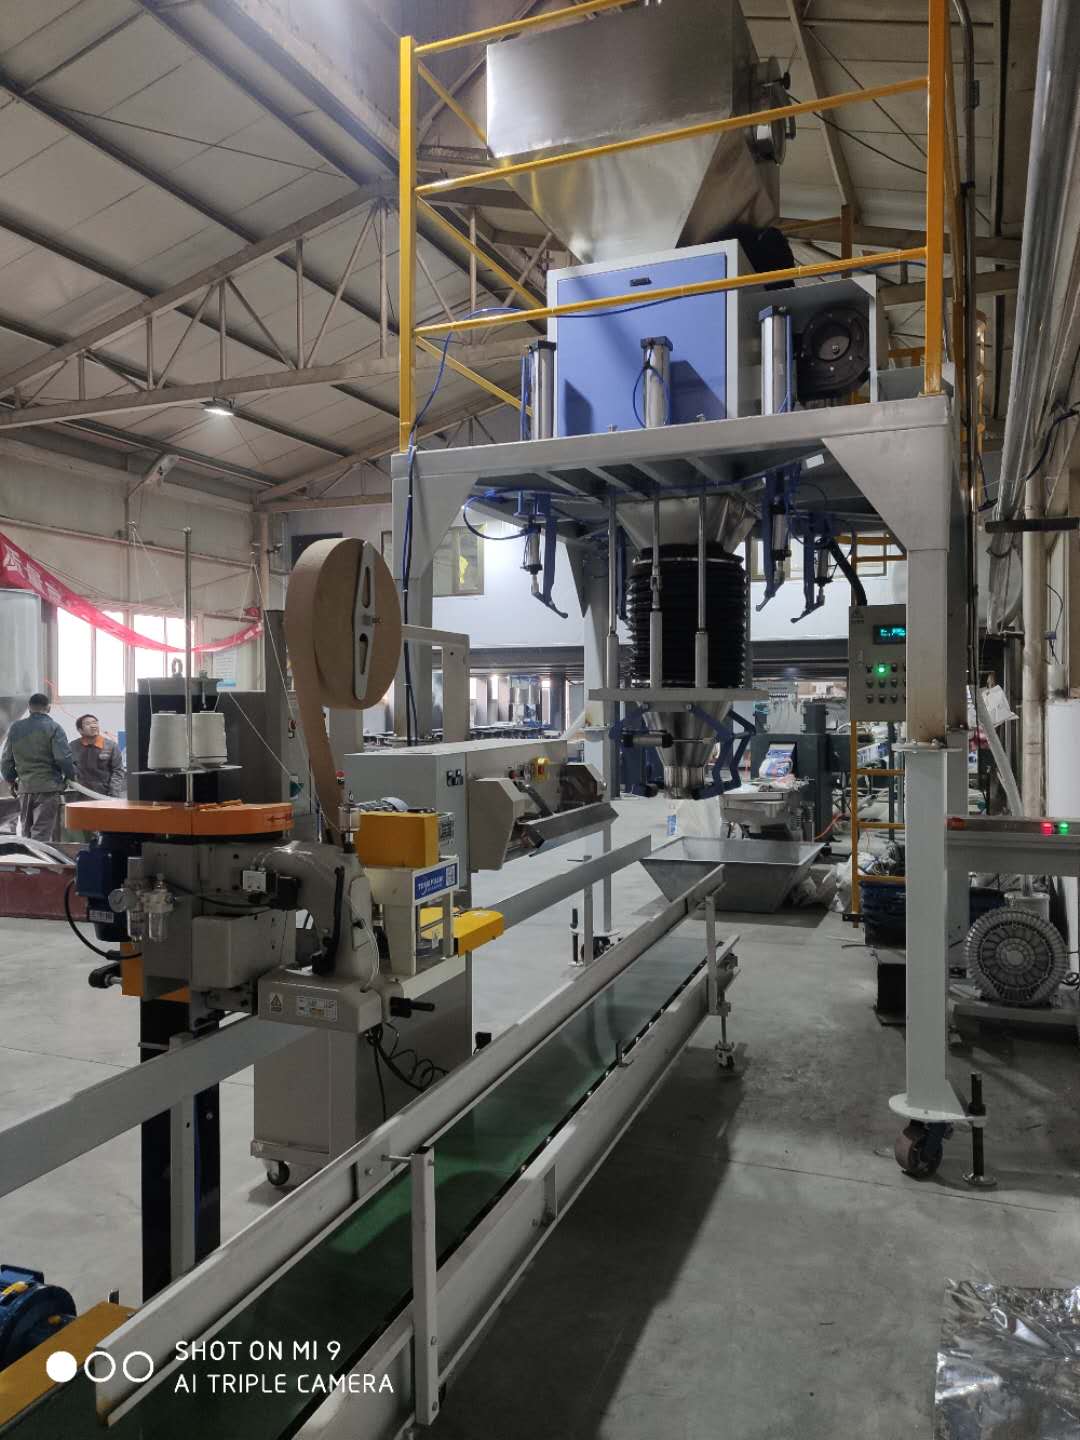 automatic packing machine Pumice bagging machine fully Automatic Packing Palletizing Line, Fully Automatic Packing Line, Fully Automatic Bagging Line, Fully Automatic filling and packaging line, autom